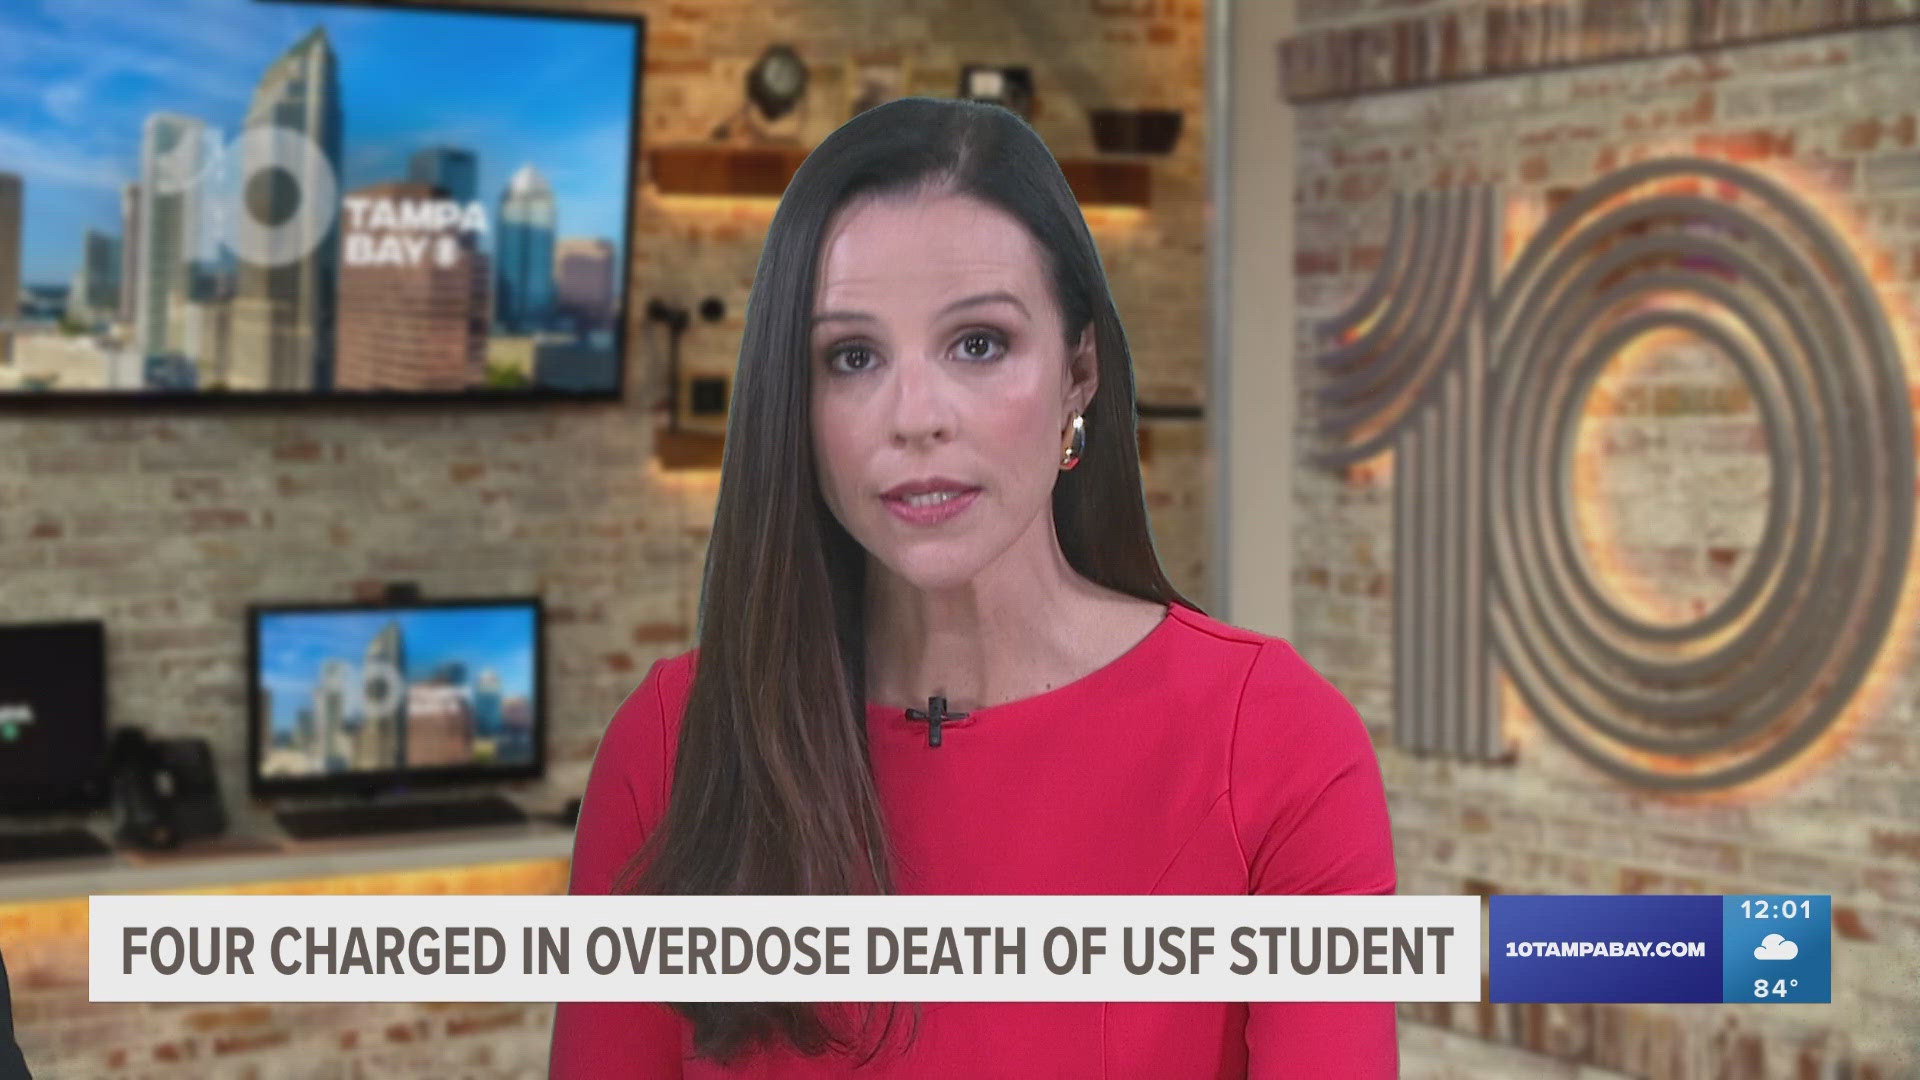 The USF student died from a fentanyl overdose. A grand jury charged the four men with nine counts. If convicted, the men will face 20 years to life in federal prison